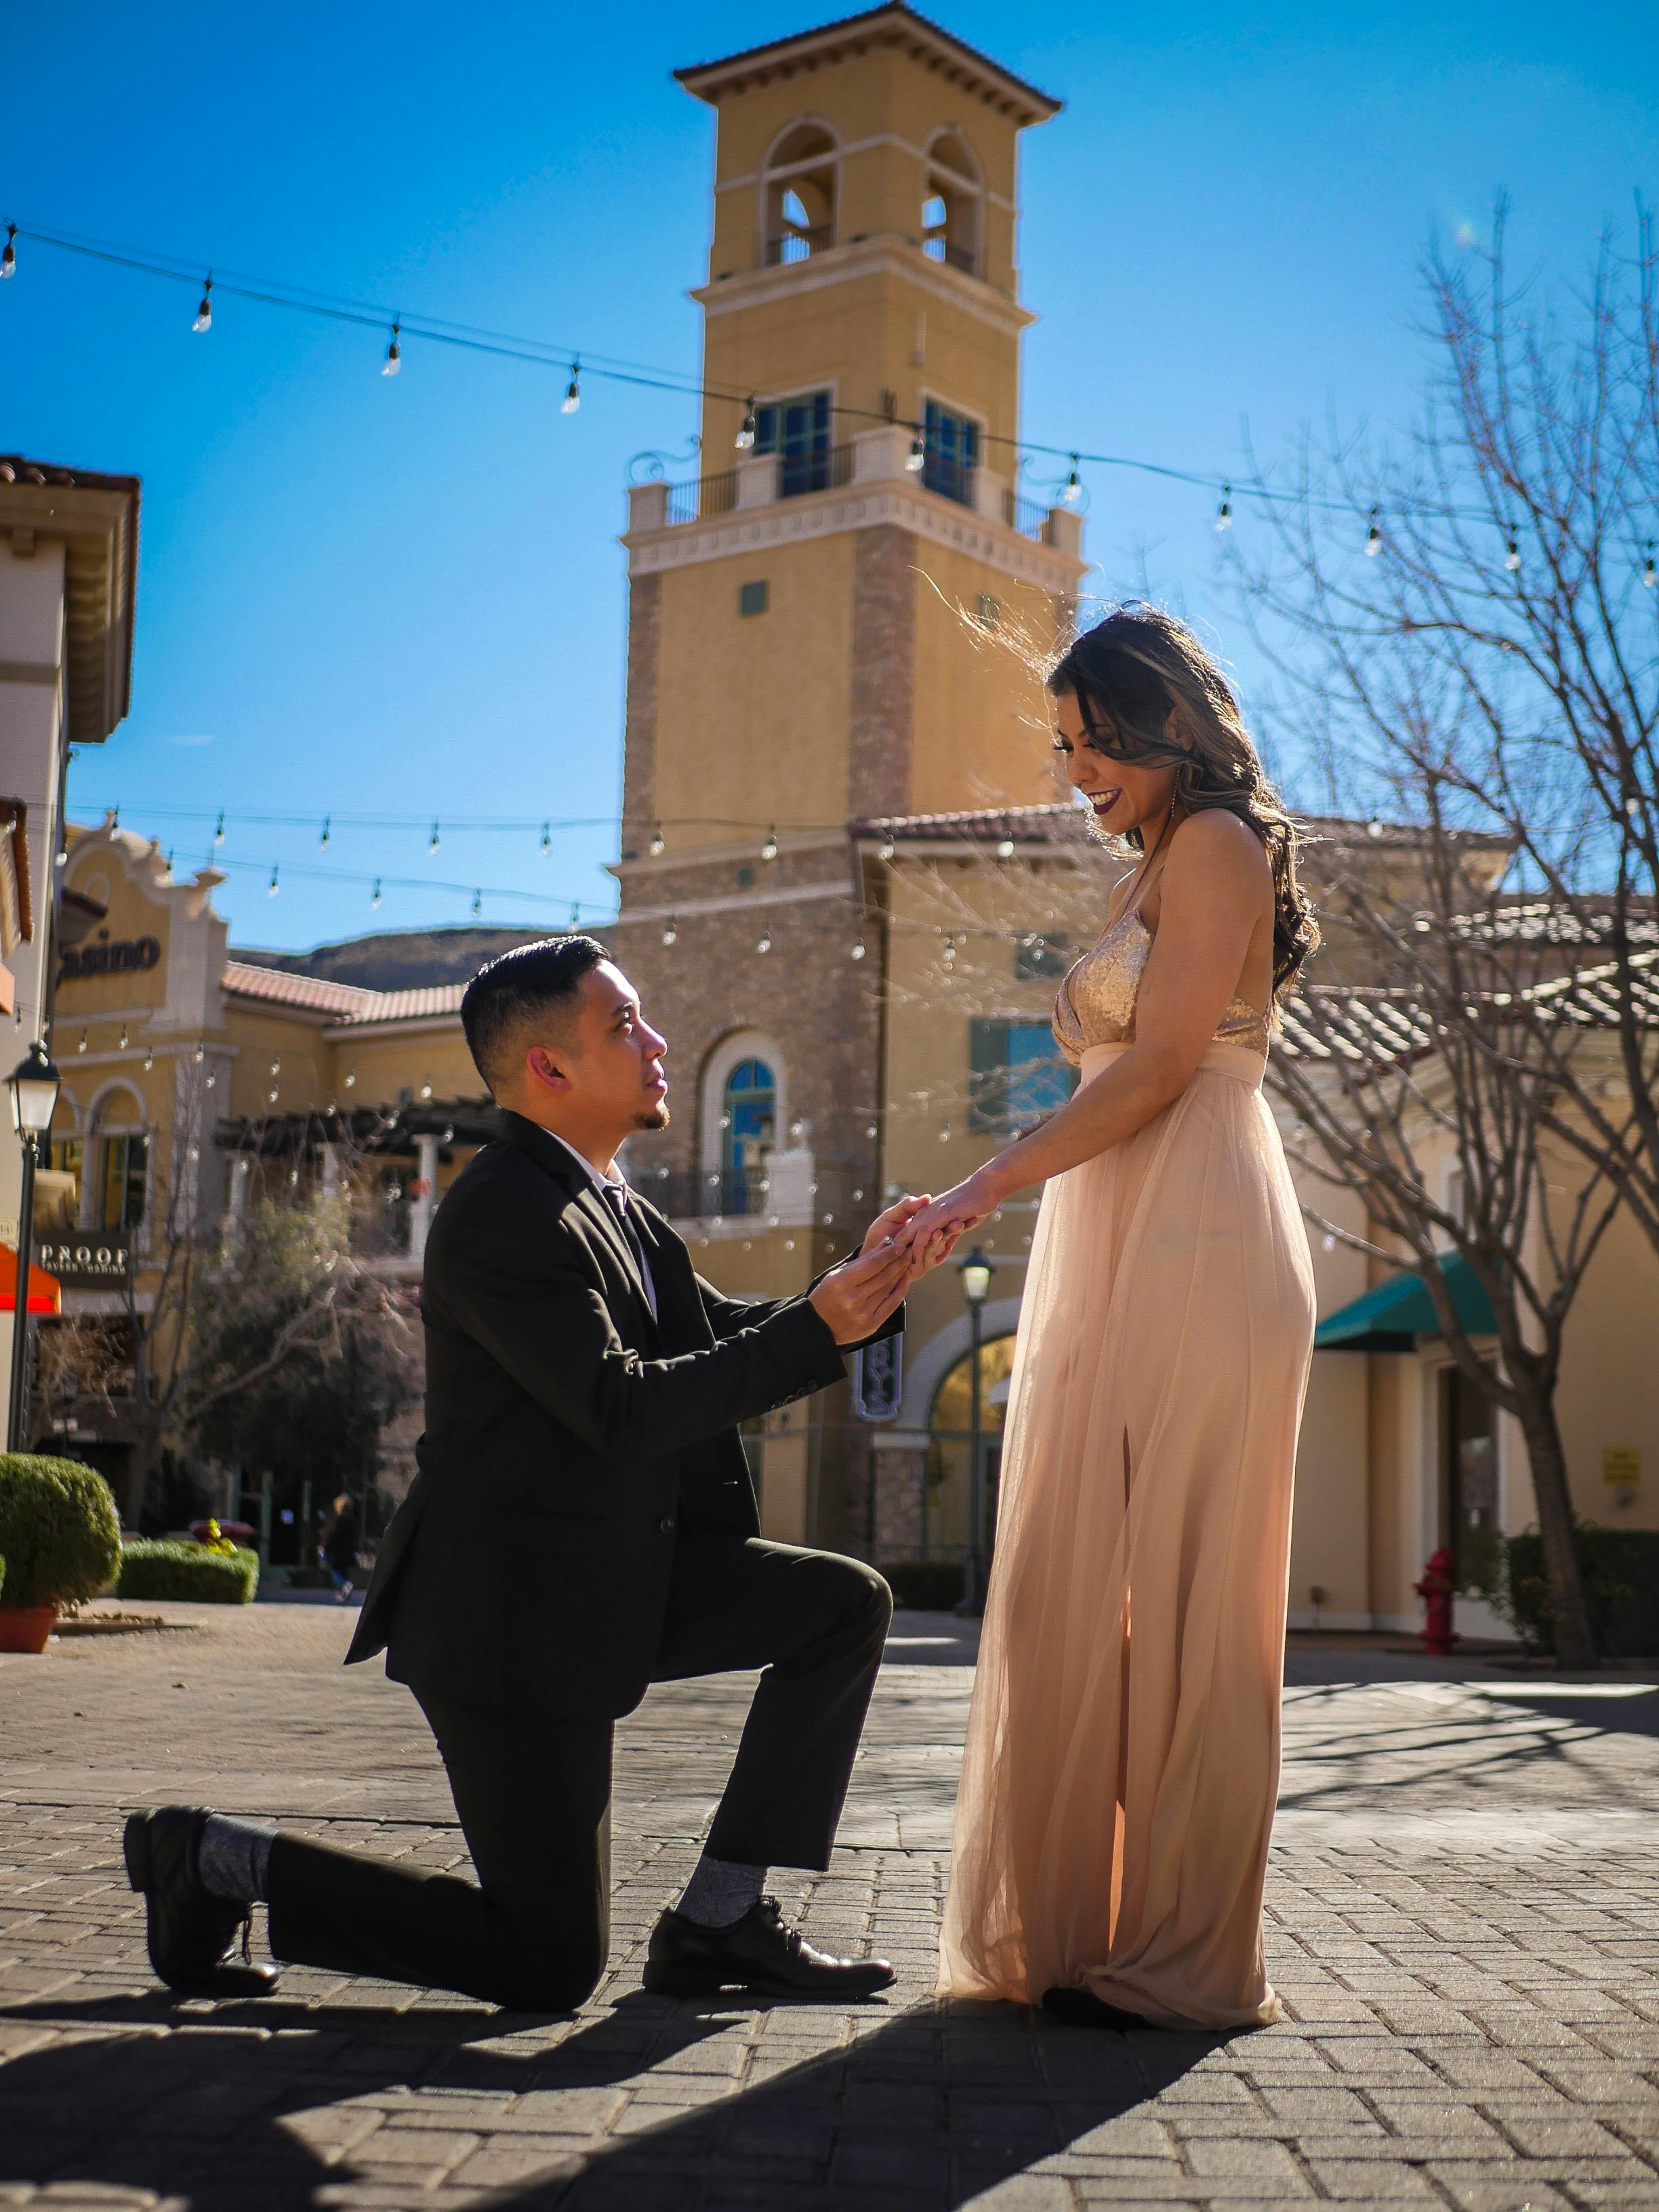 A guy proposing to his girlfriend | Source: Pexels